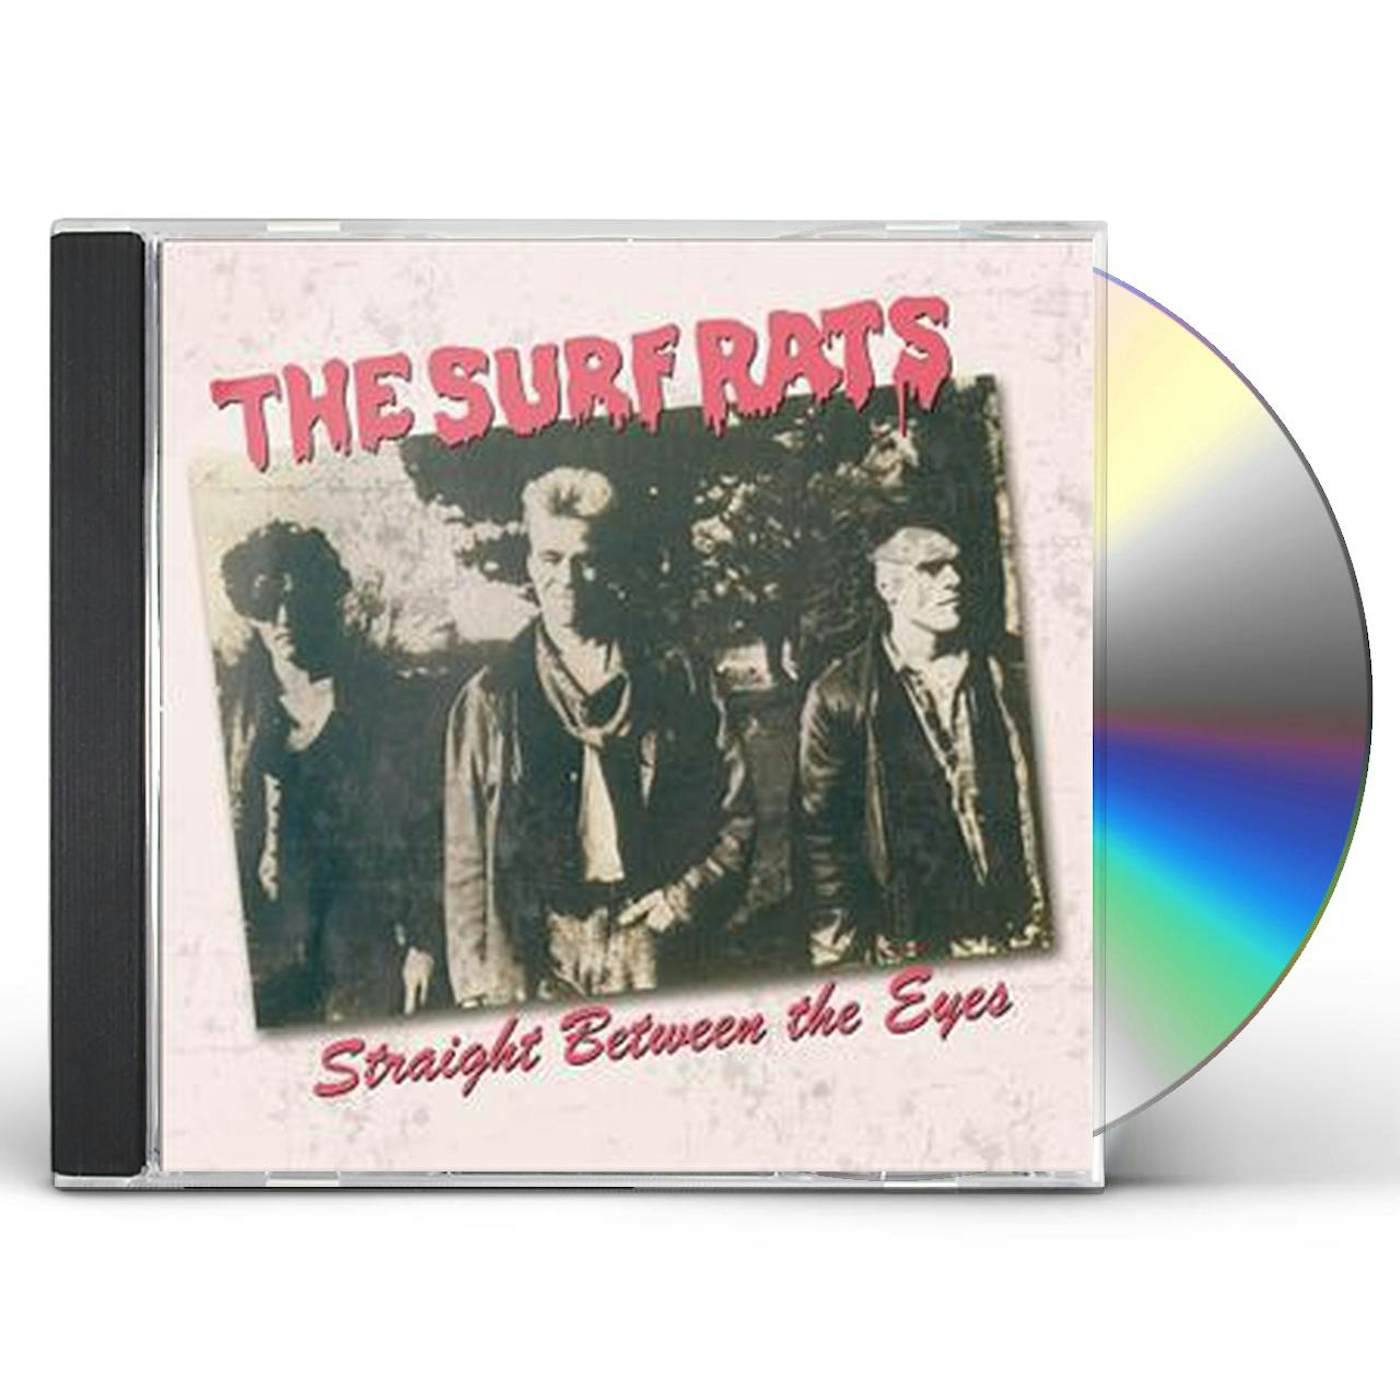 The Surf Rats STRAIGHT BETWEEN THE EYES CD